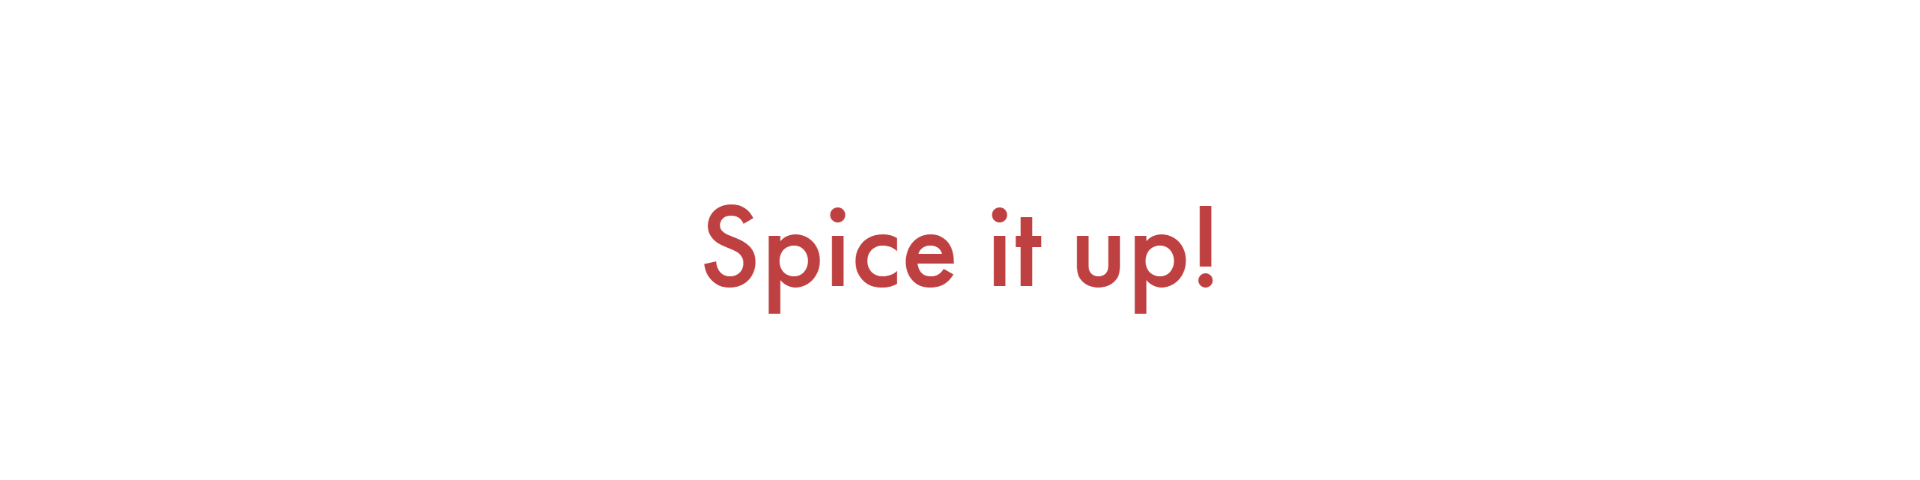 Spice it up!